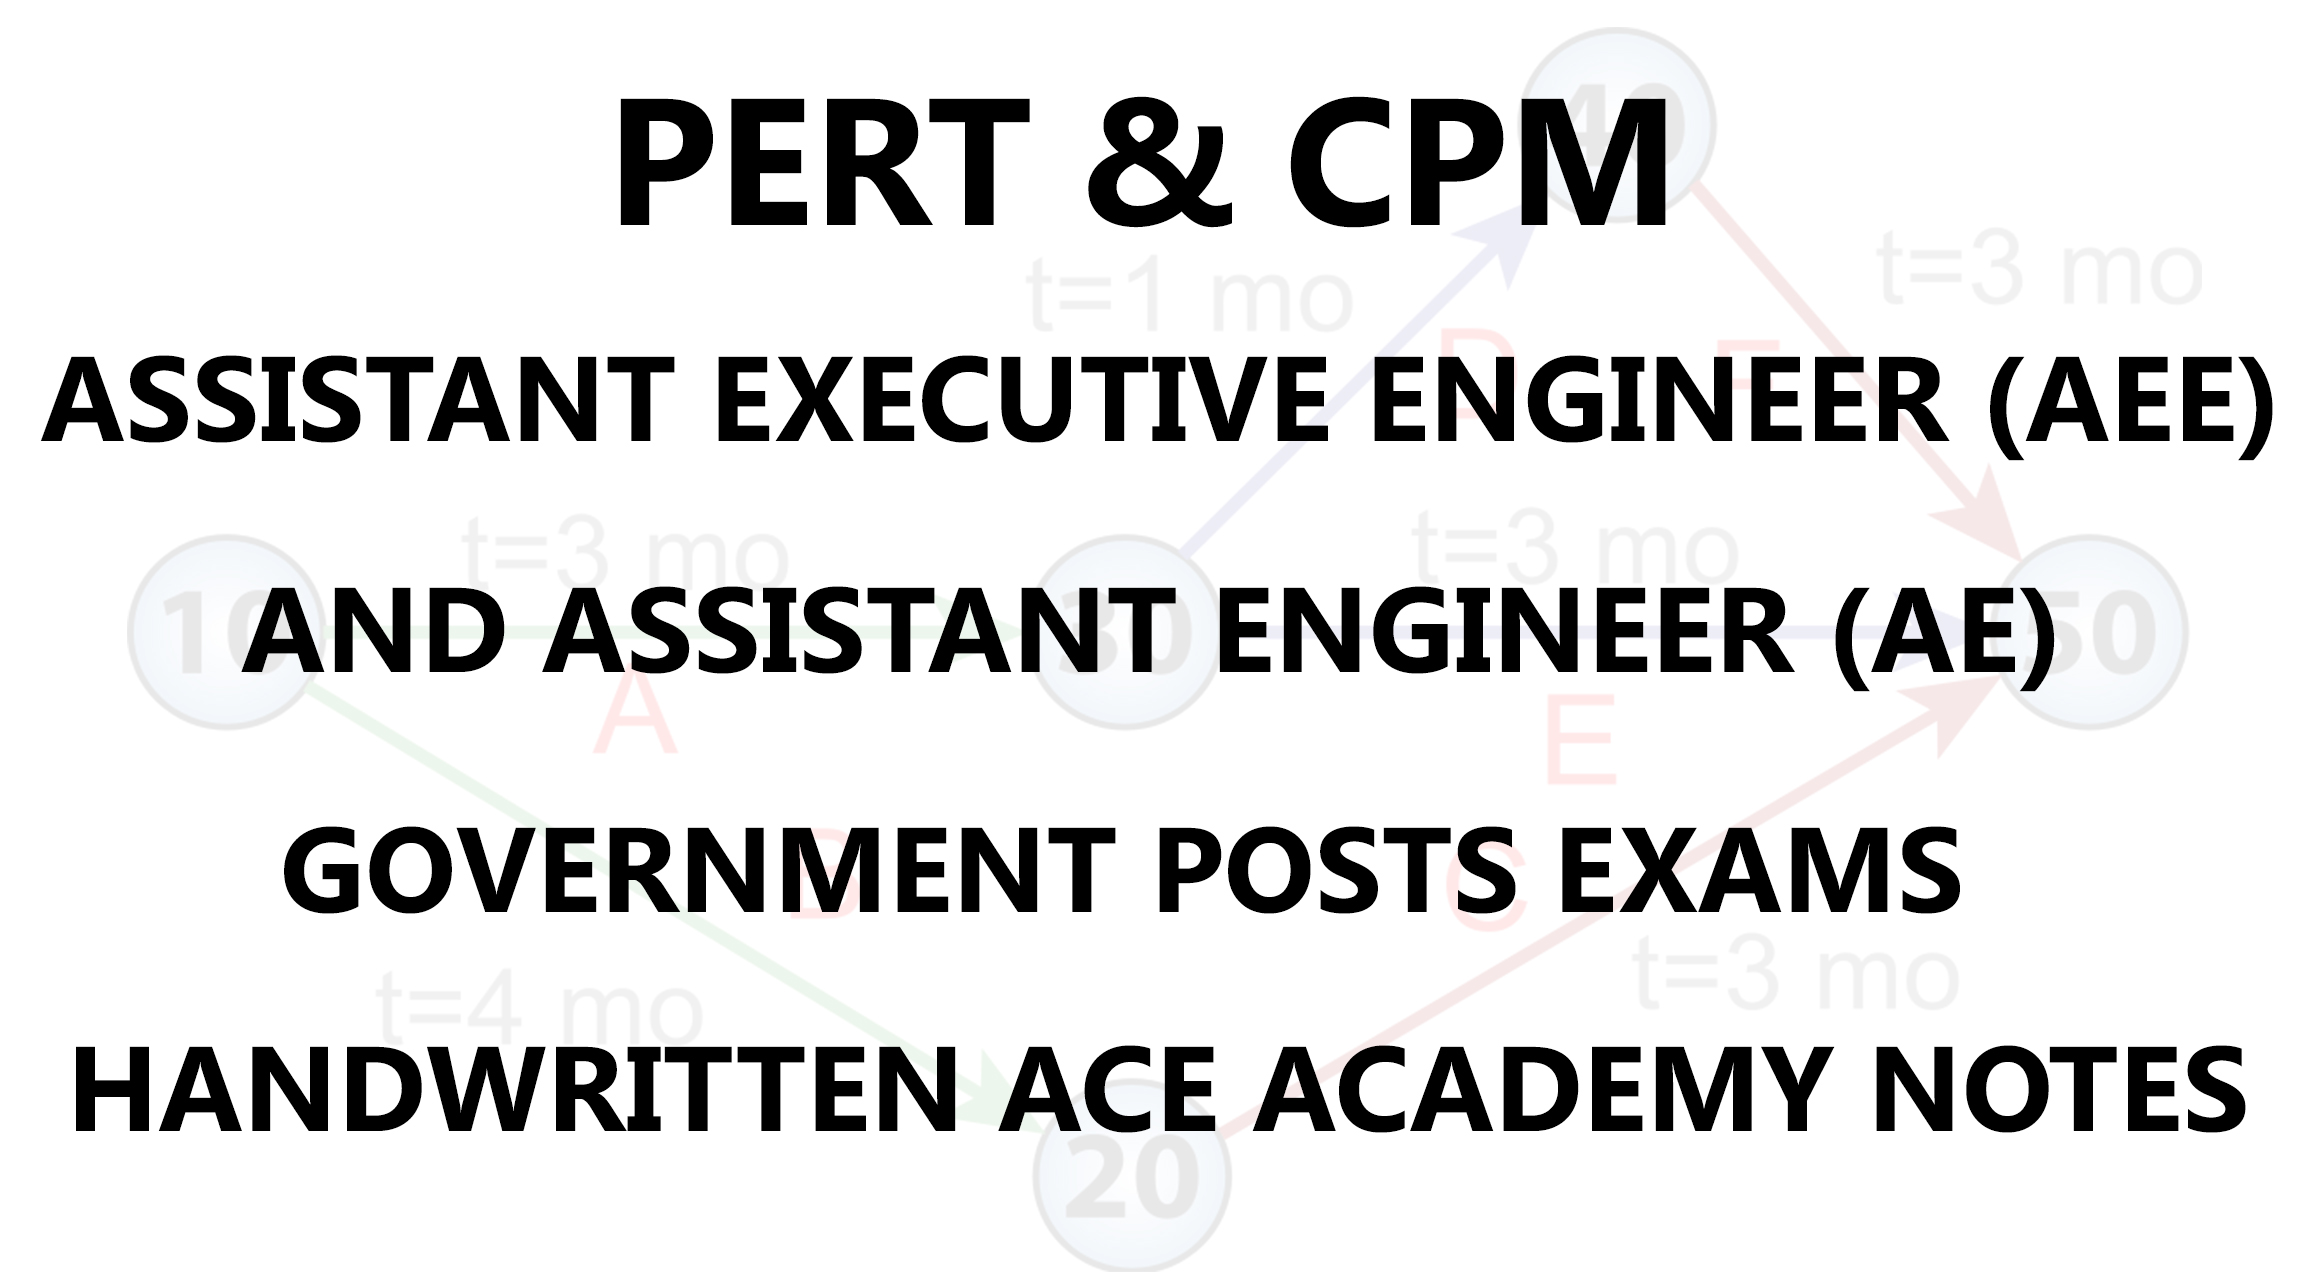 PERT AND CPM AE AEE ACE ACADEMY HANDWRITTEN NOTES PDF DOWNLOAD